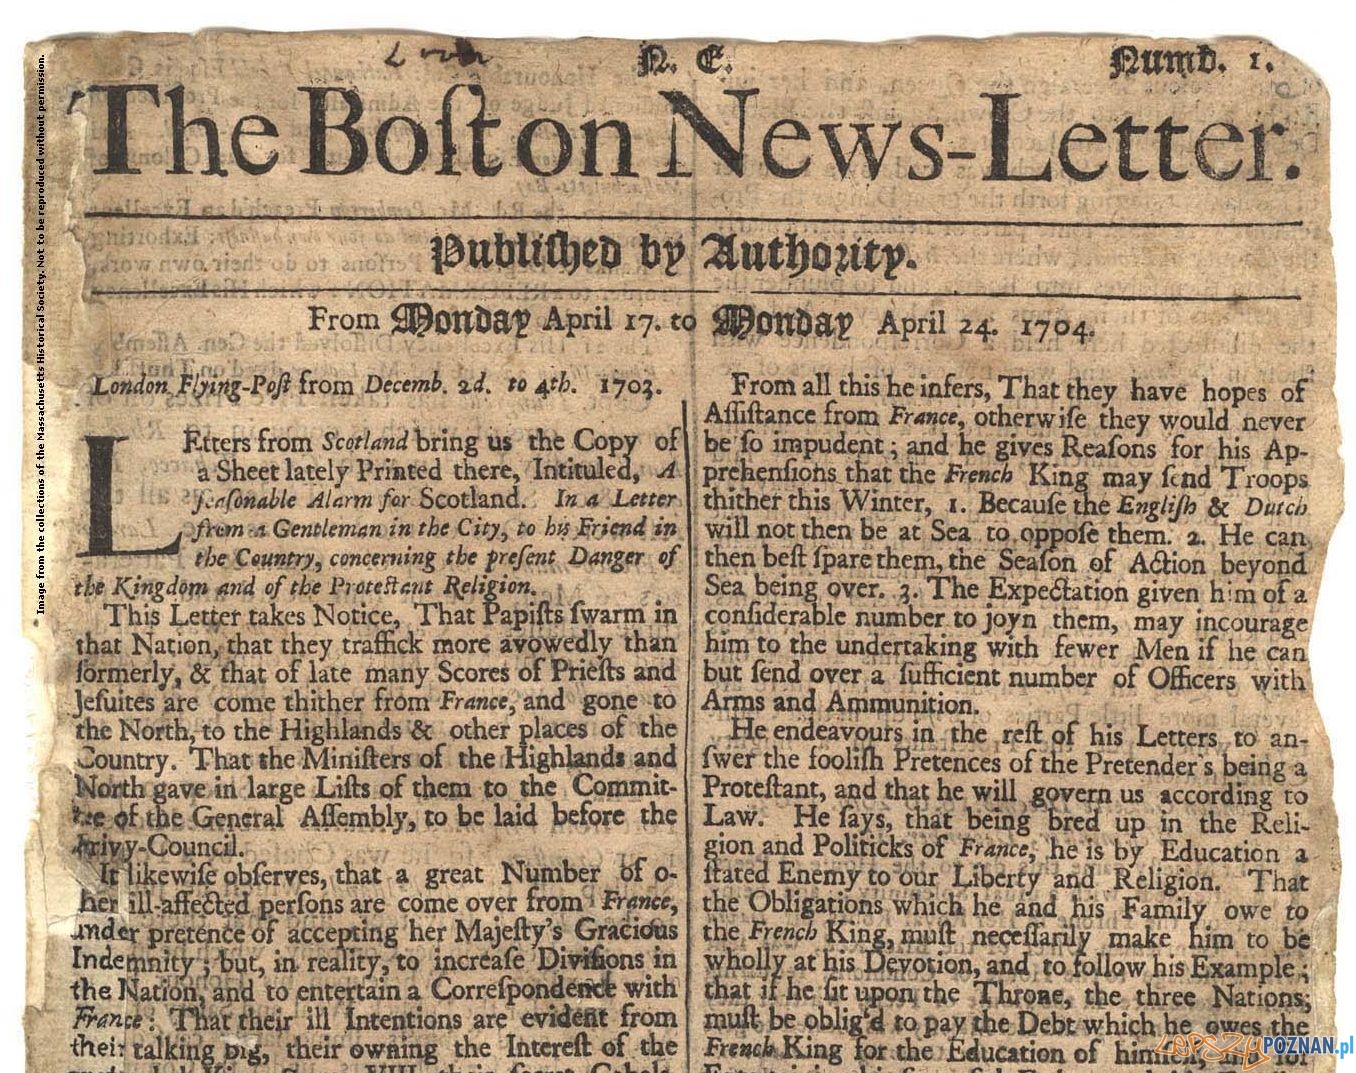 The Boston News - Letter from the collections of the Massachusettts Historical Society.